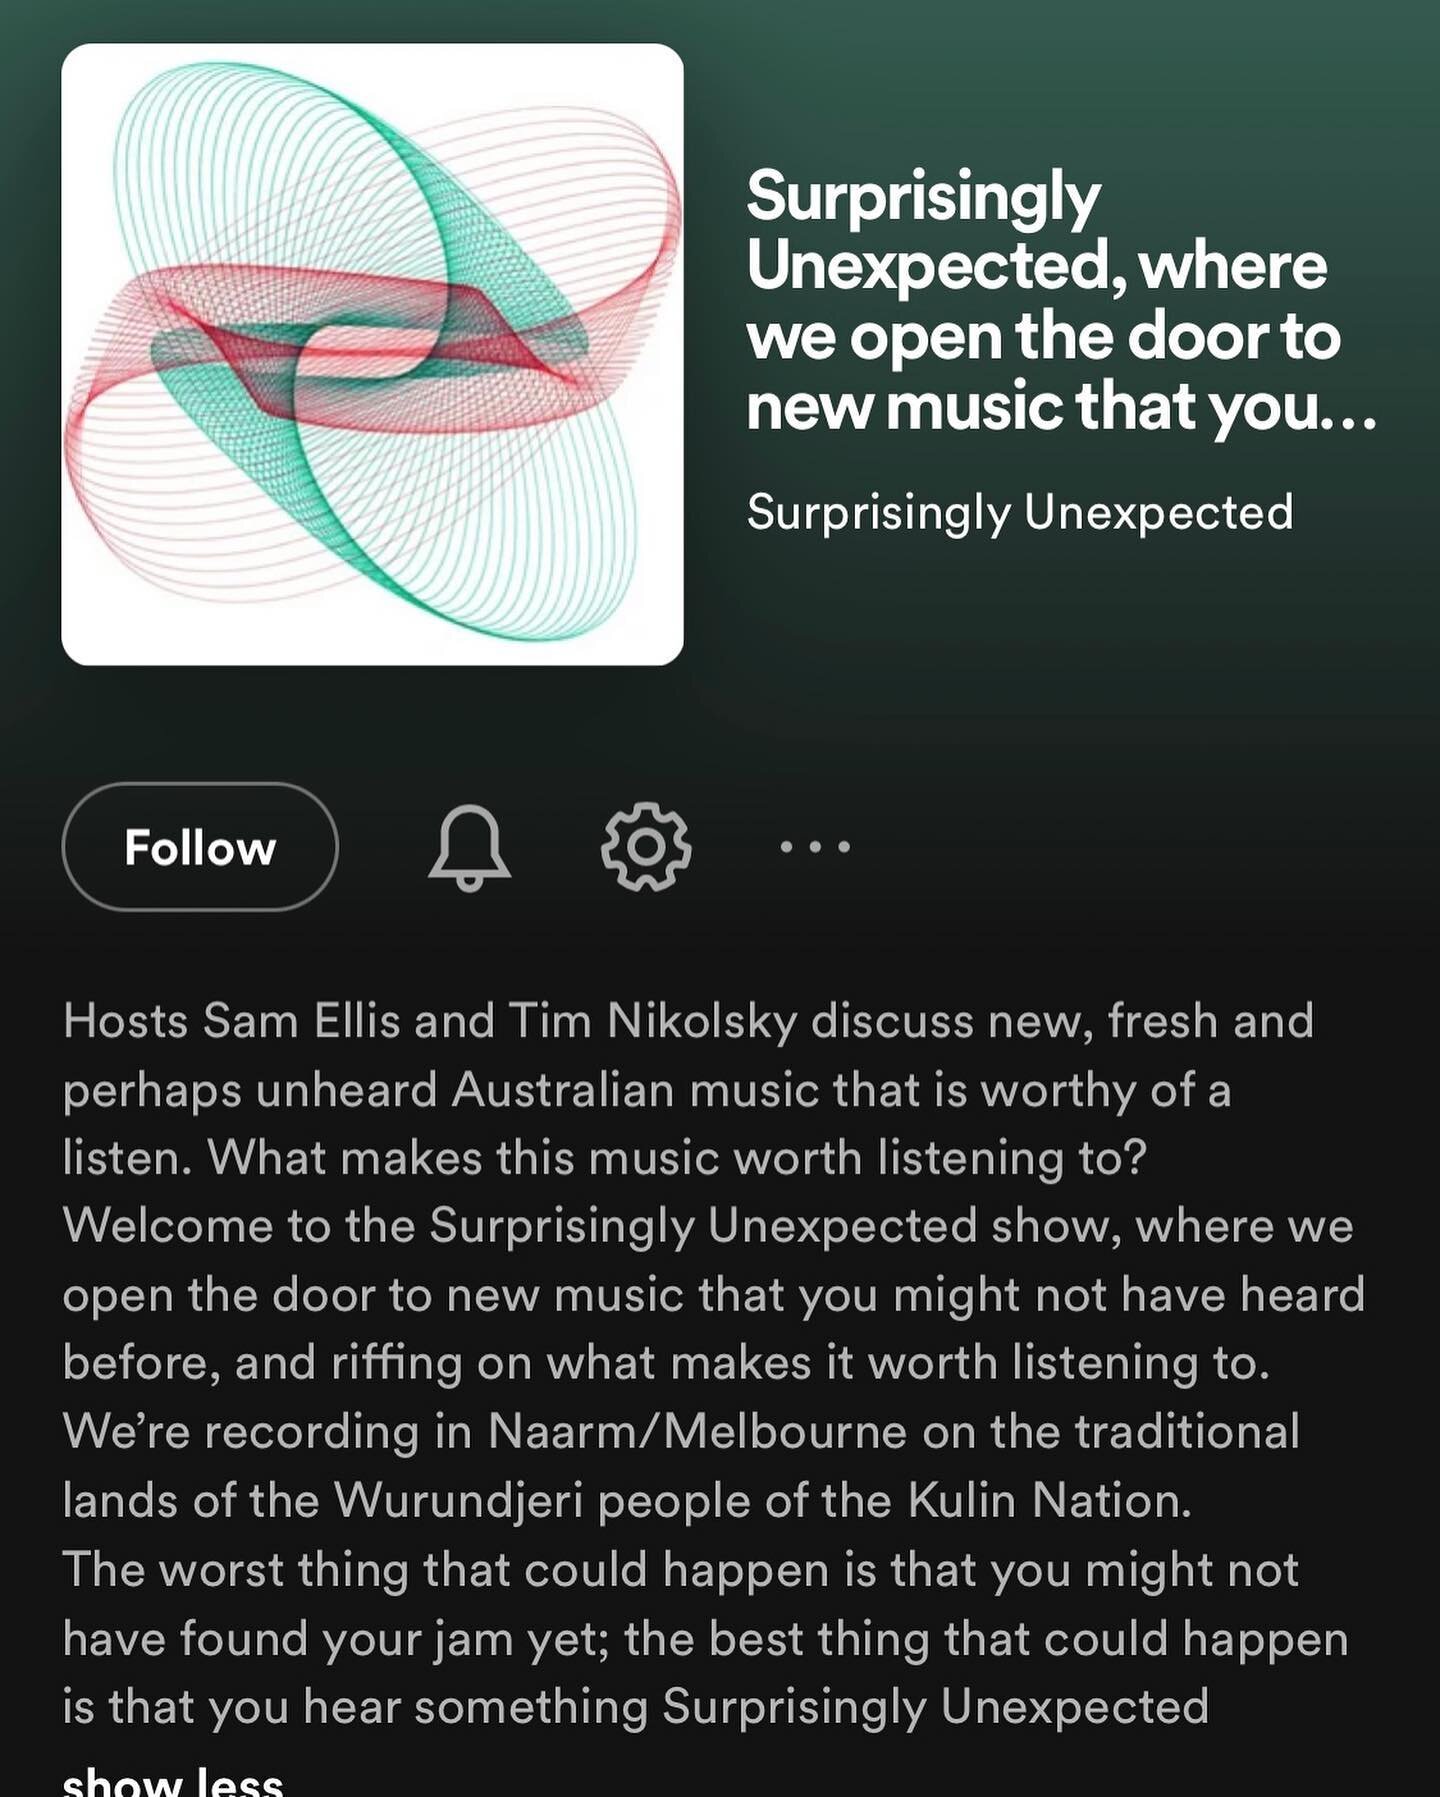 My song &ldquo;Turning Around&rdquo; has been featured in &ldquo;Surprisingly Unexpected&rdquo; a podcast that discusses new and fresh Australian music. Other artists reviewed on the podcast are Jen Cloher, Lisa Mitchell and Gabriella Cohen, a pretty